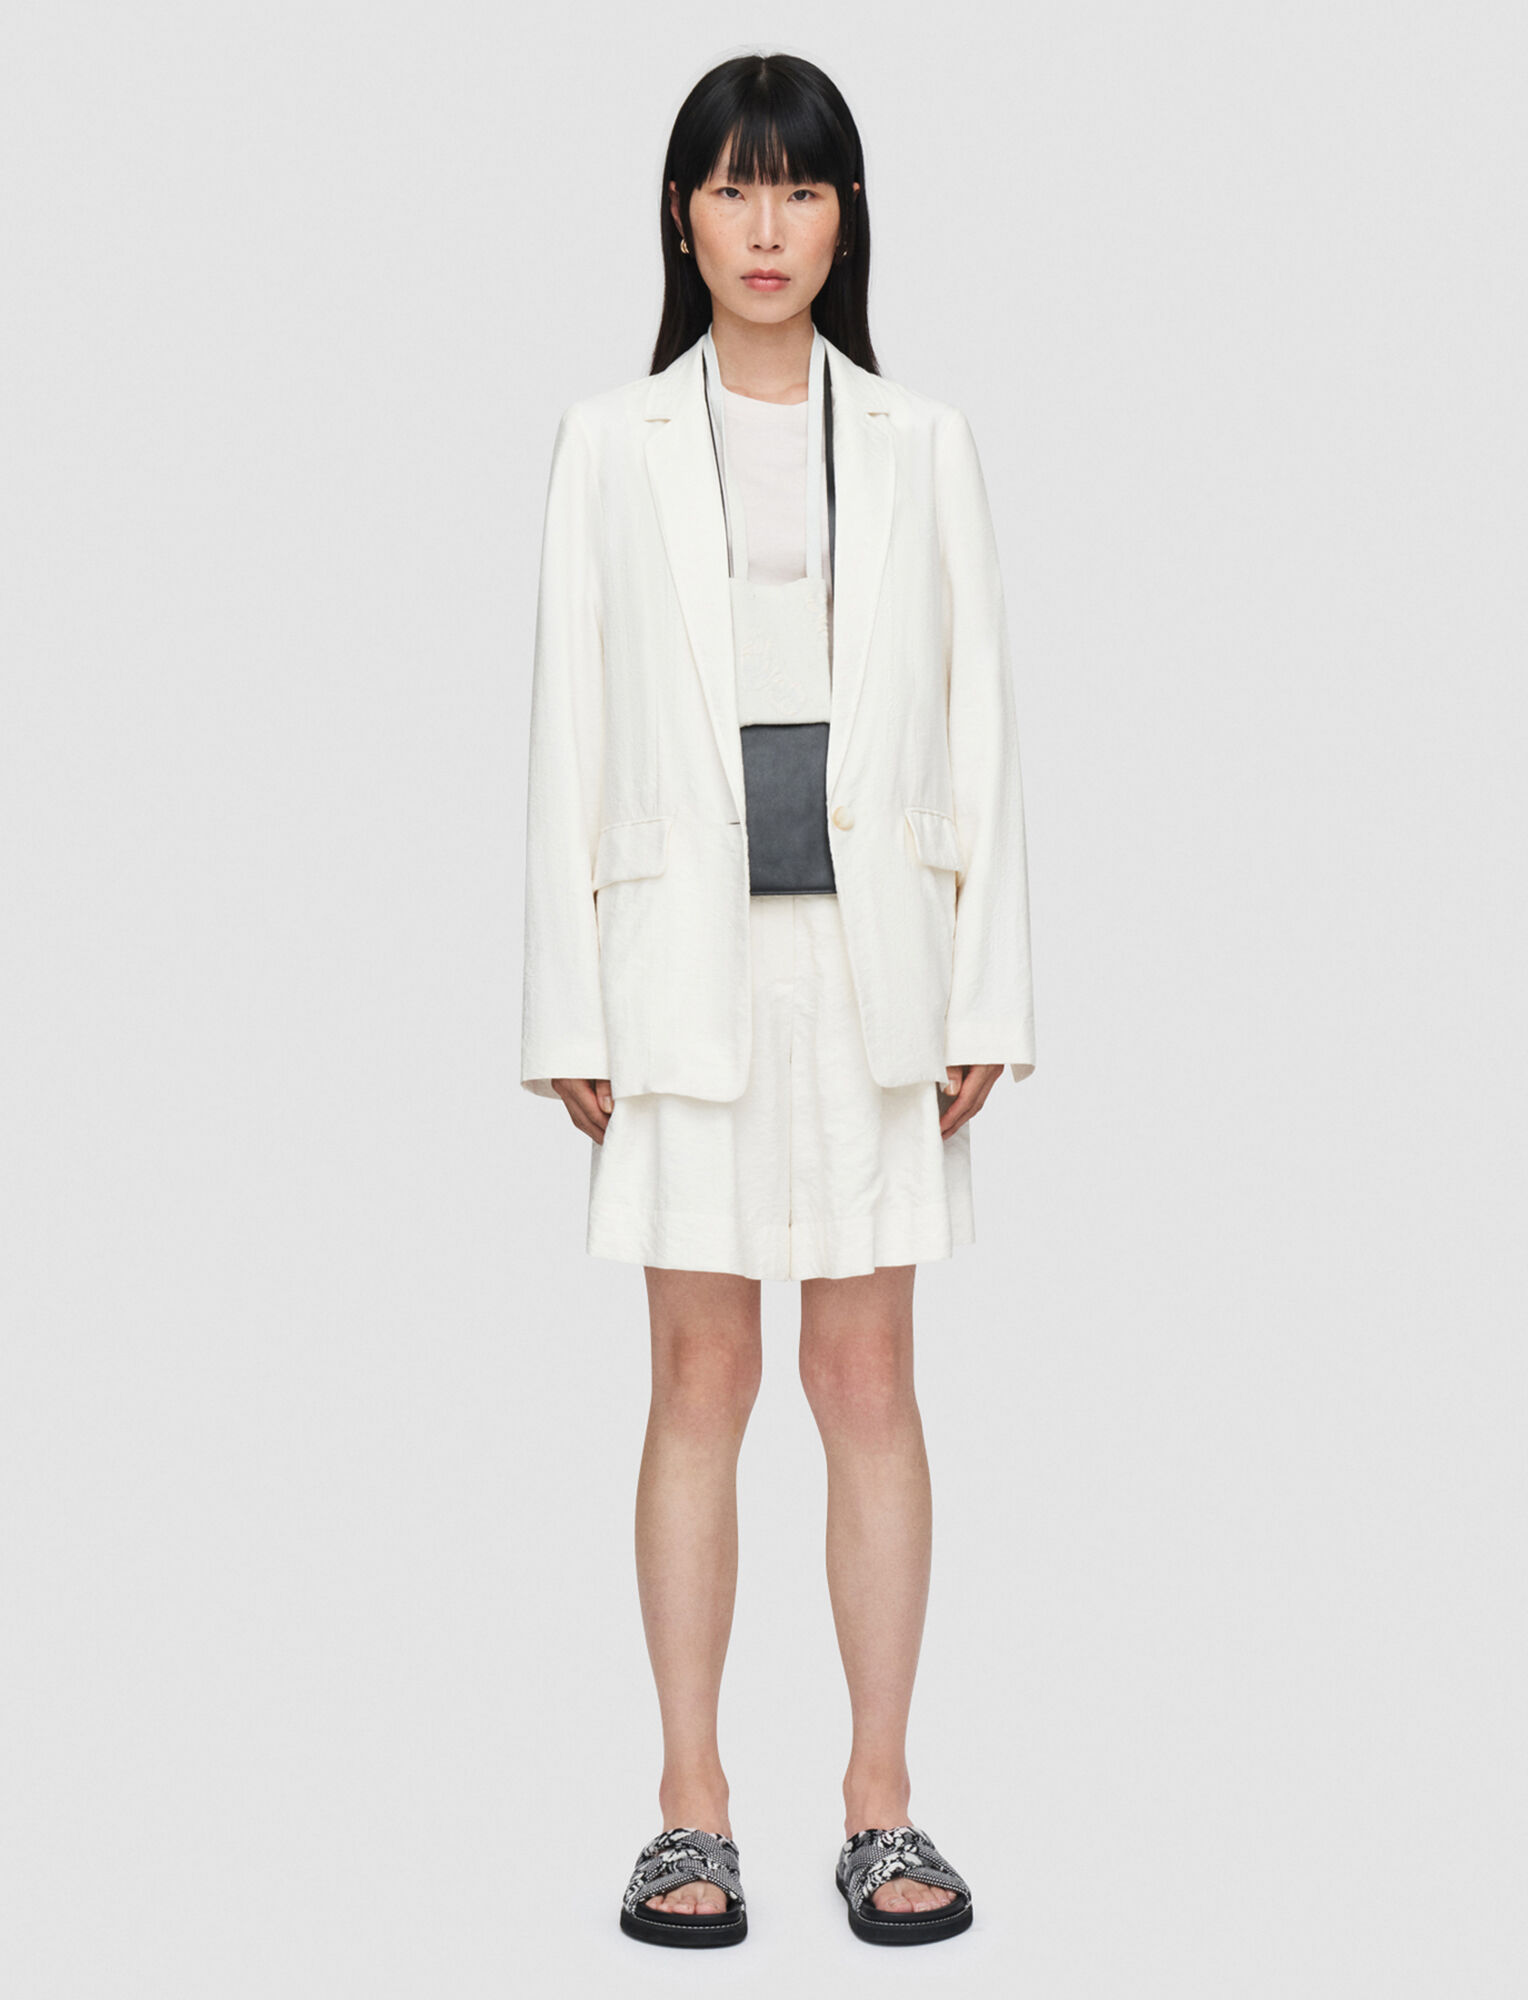 Joseph, Textured Twill Lawrence Jacket, in Ivory